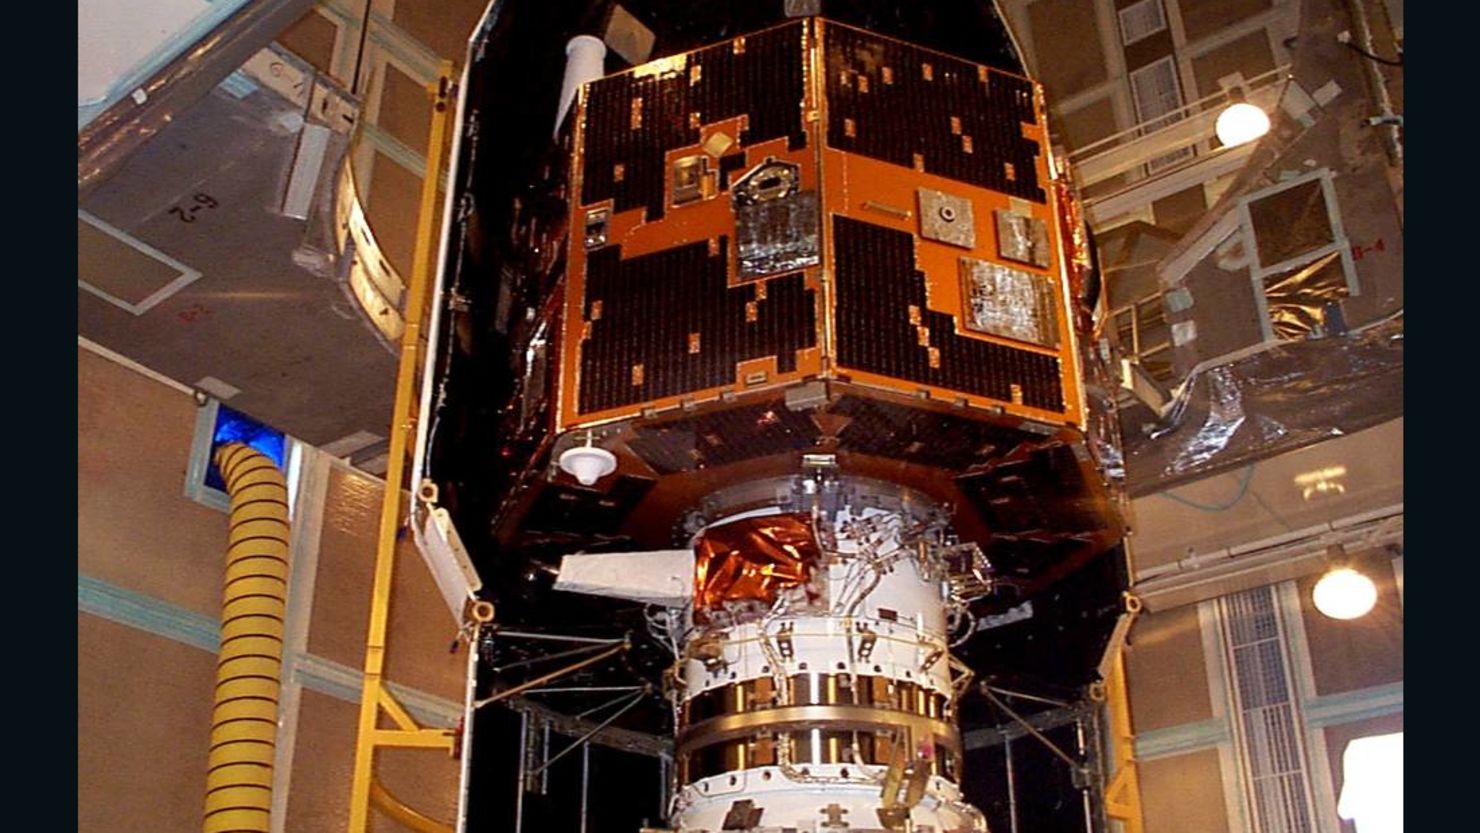 The IMAGE spacecraft is seen undergoing launch preparations in early 2000.